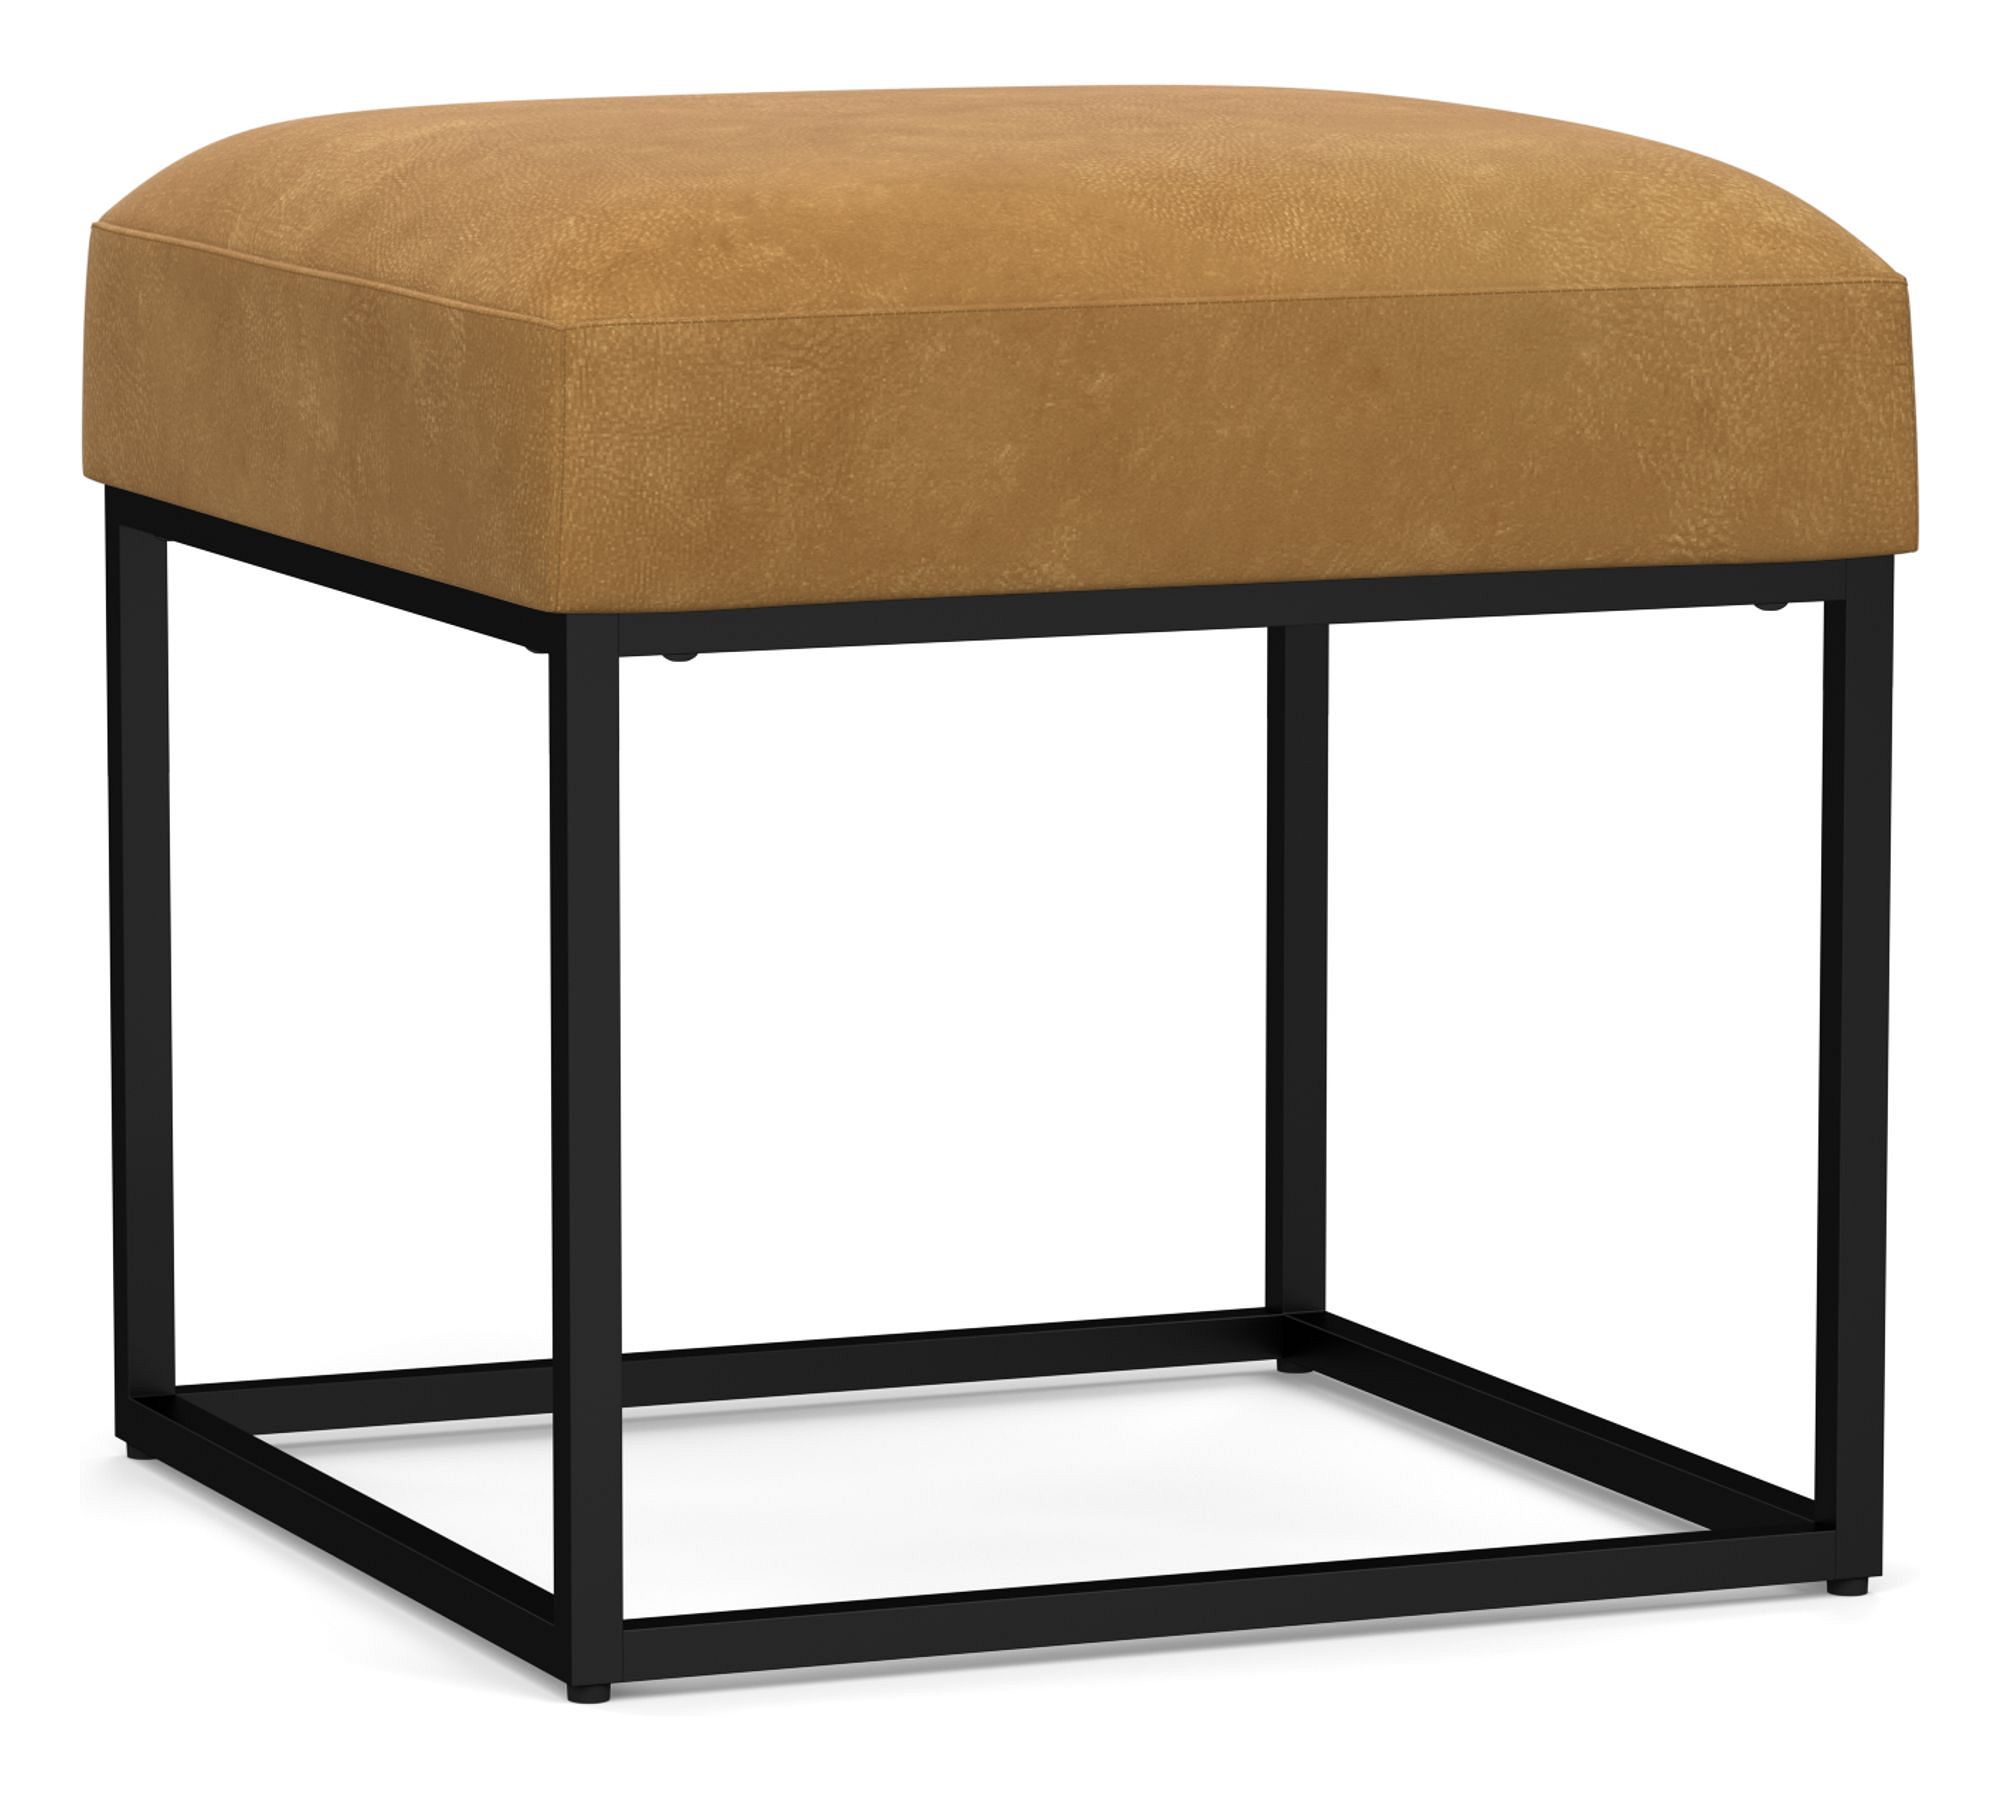 Millie Leather Square Accent Stool